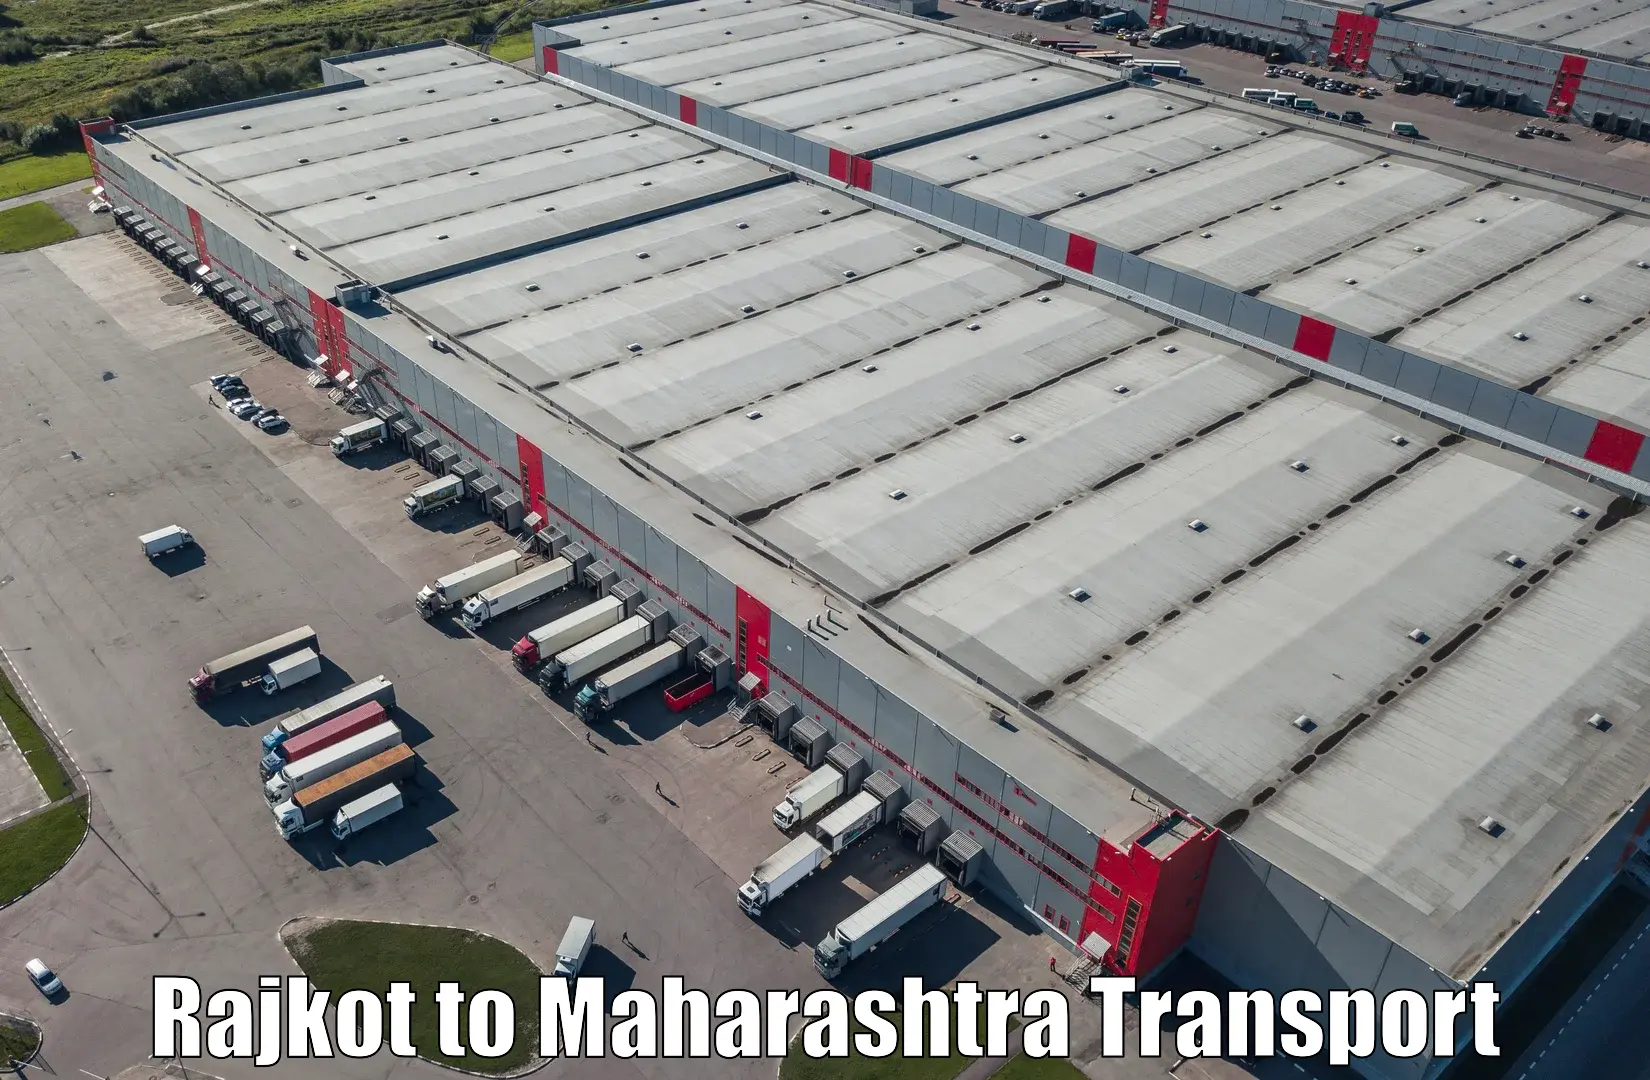 Air freight transport services Rajkot to Alephata